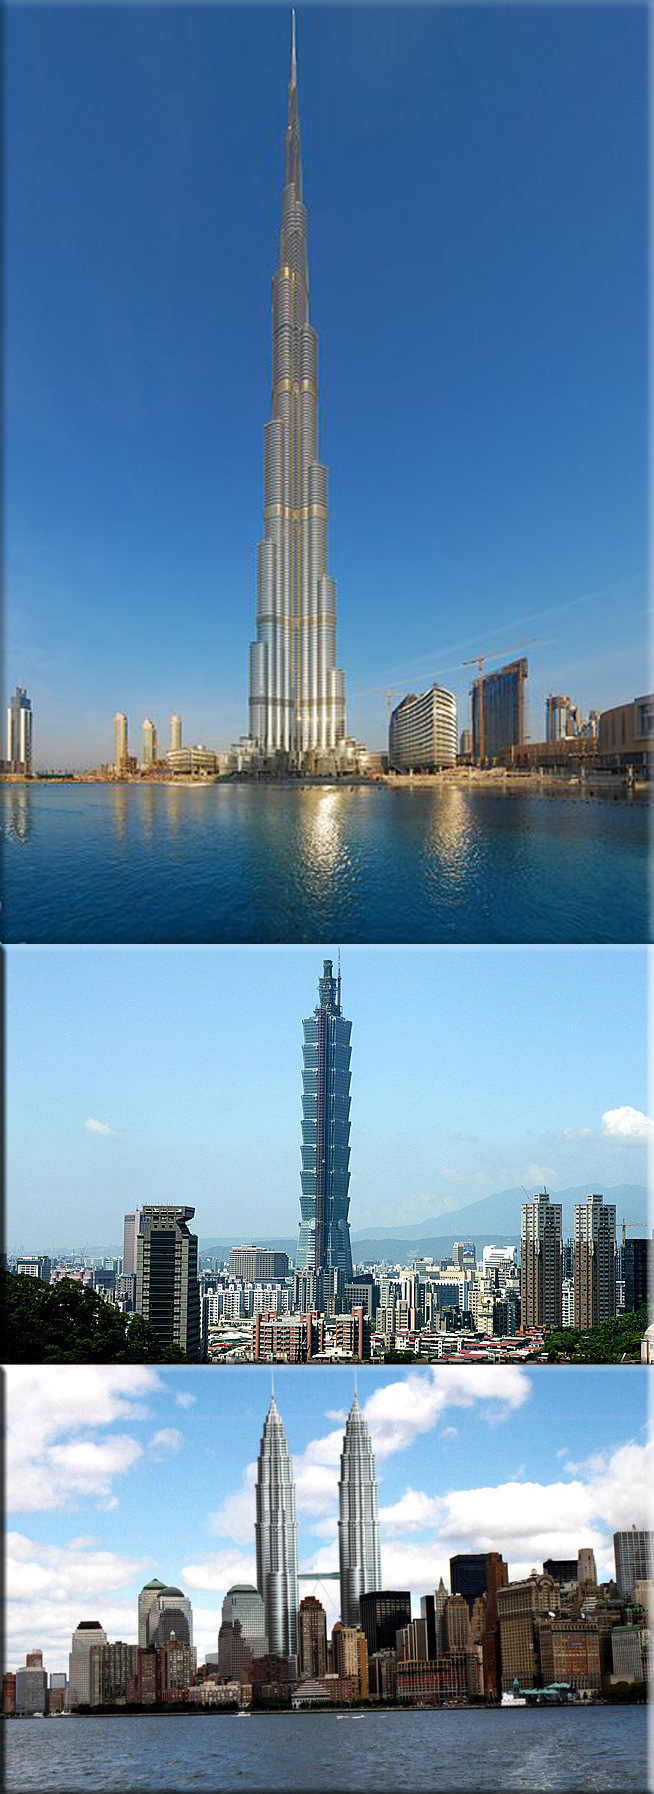 On January 4th, 2010, Burj Khalifa officially opened as the tallest manmade structure in the world; On October 17th, 2003, the pinnacle is fitted on the roof of Taipei 101, a 101-floor skyscraper in Taipei, allowing it to surpass the Petronas Twin Towers in Kuala Lumpur by 56 metres (184 ft) and become the World's tallest highrise